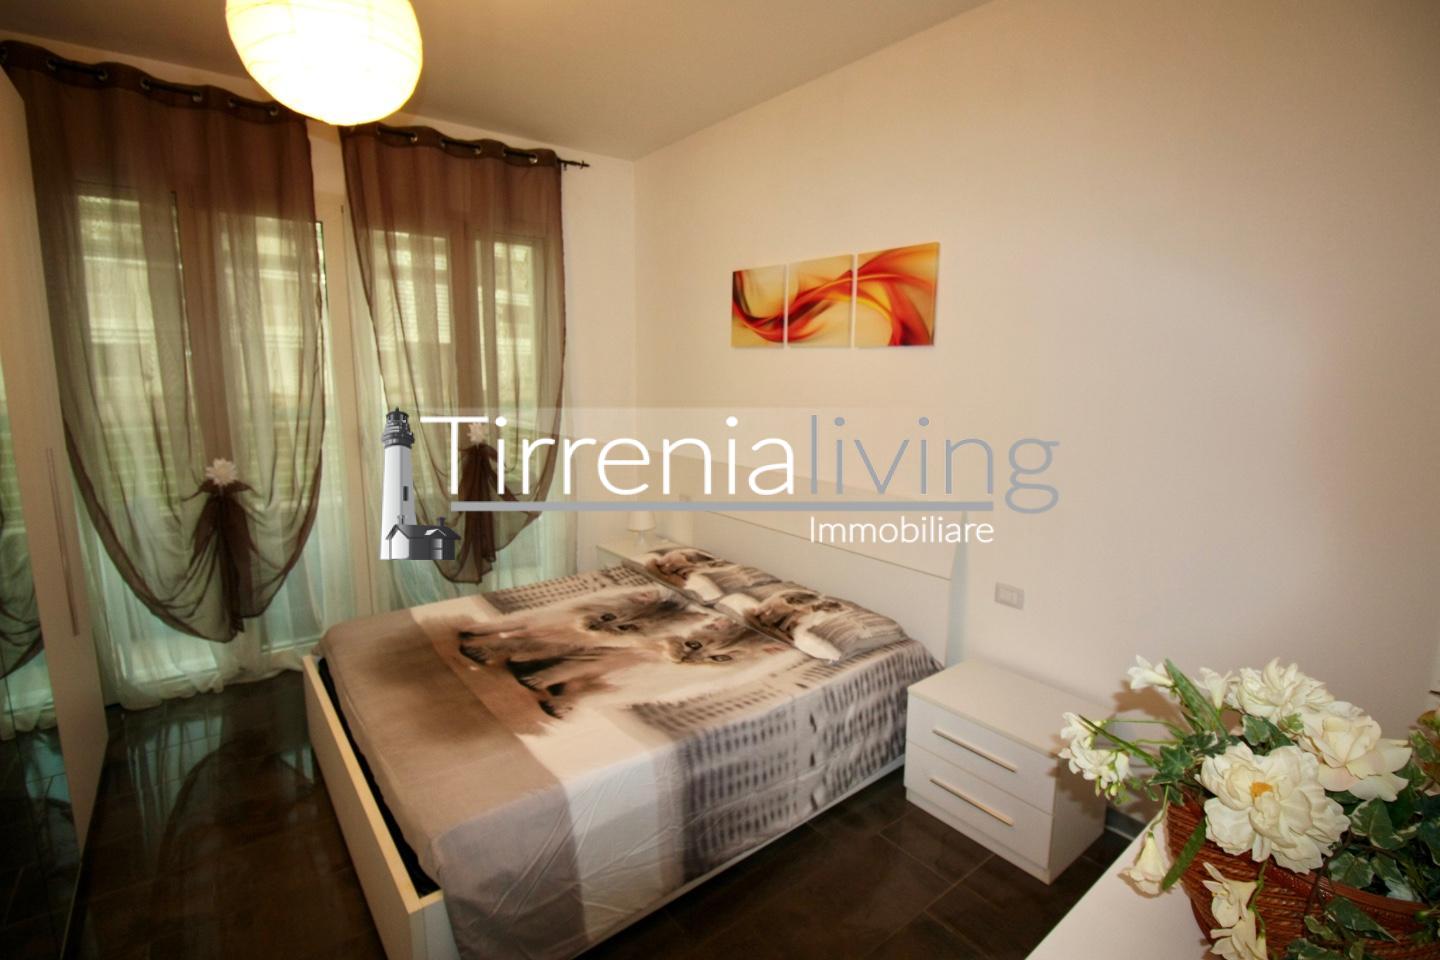 Apartment for rent, ref. A-506